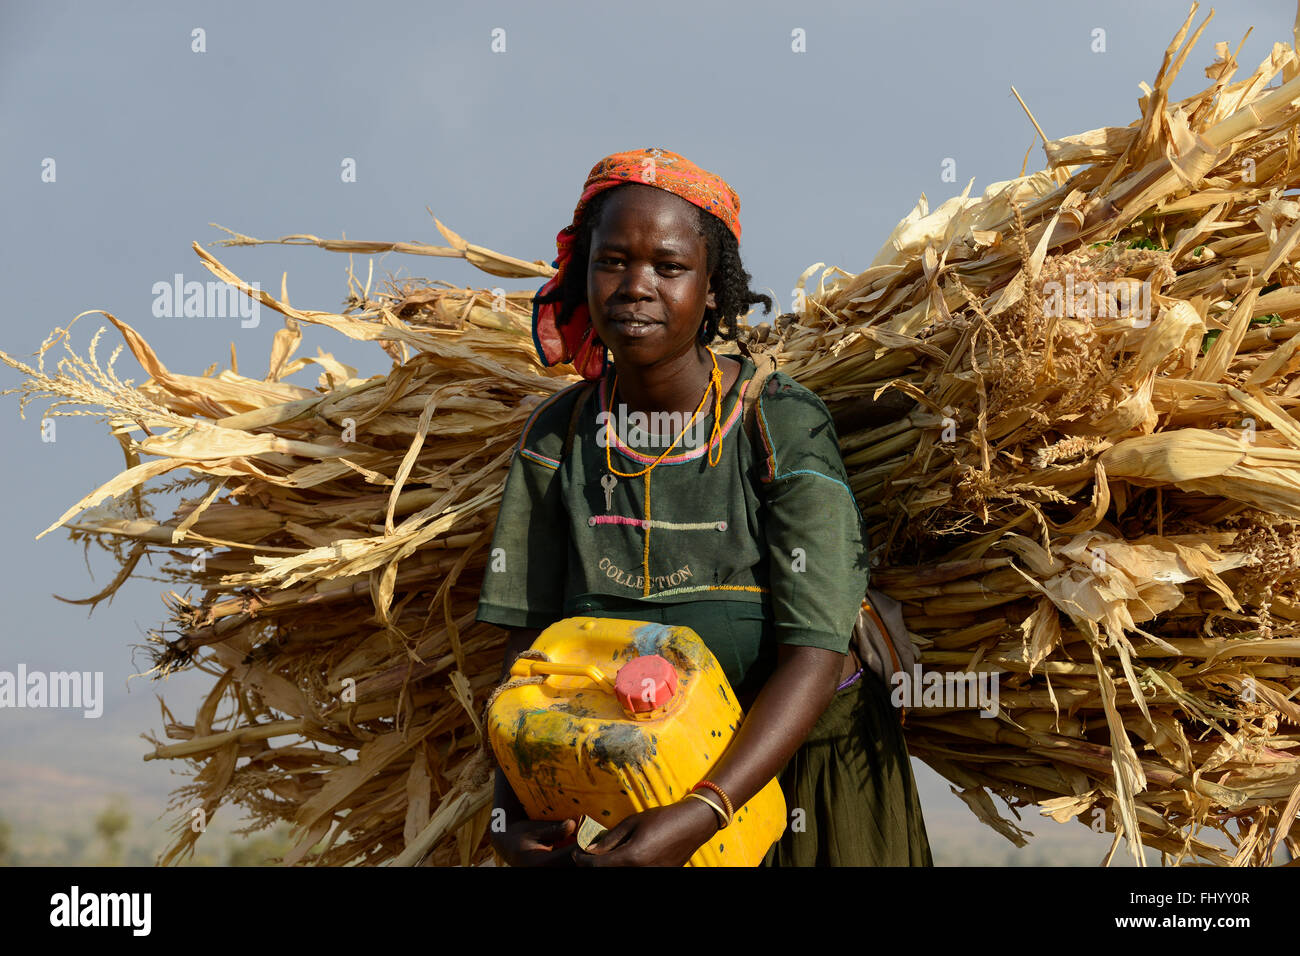 ETHIOPIA, Southern Nations, Lower Omo valley, tribal woman carry maize straw Stock Photo